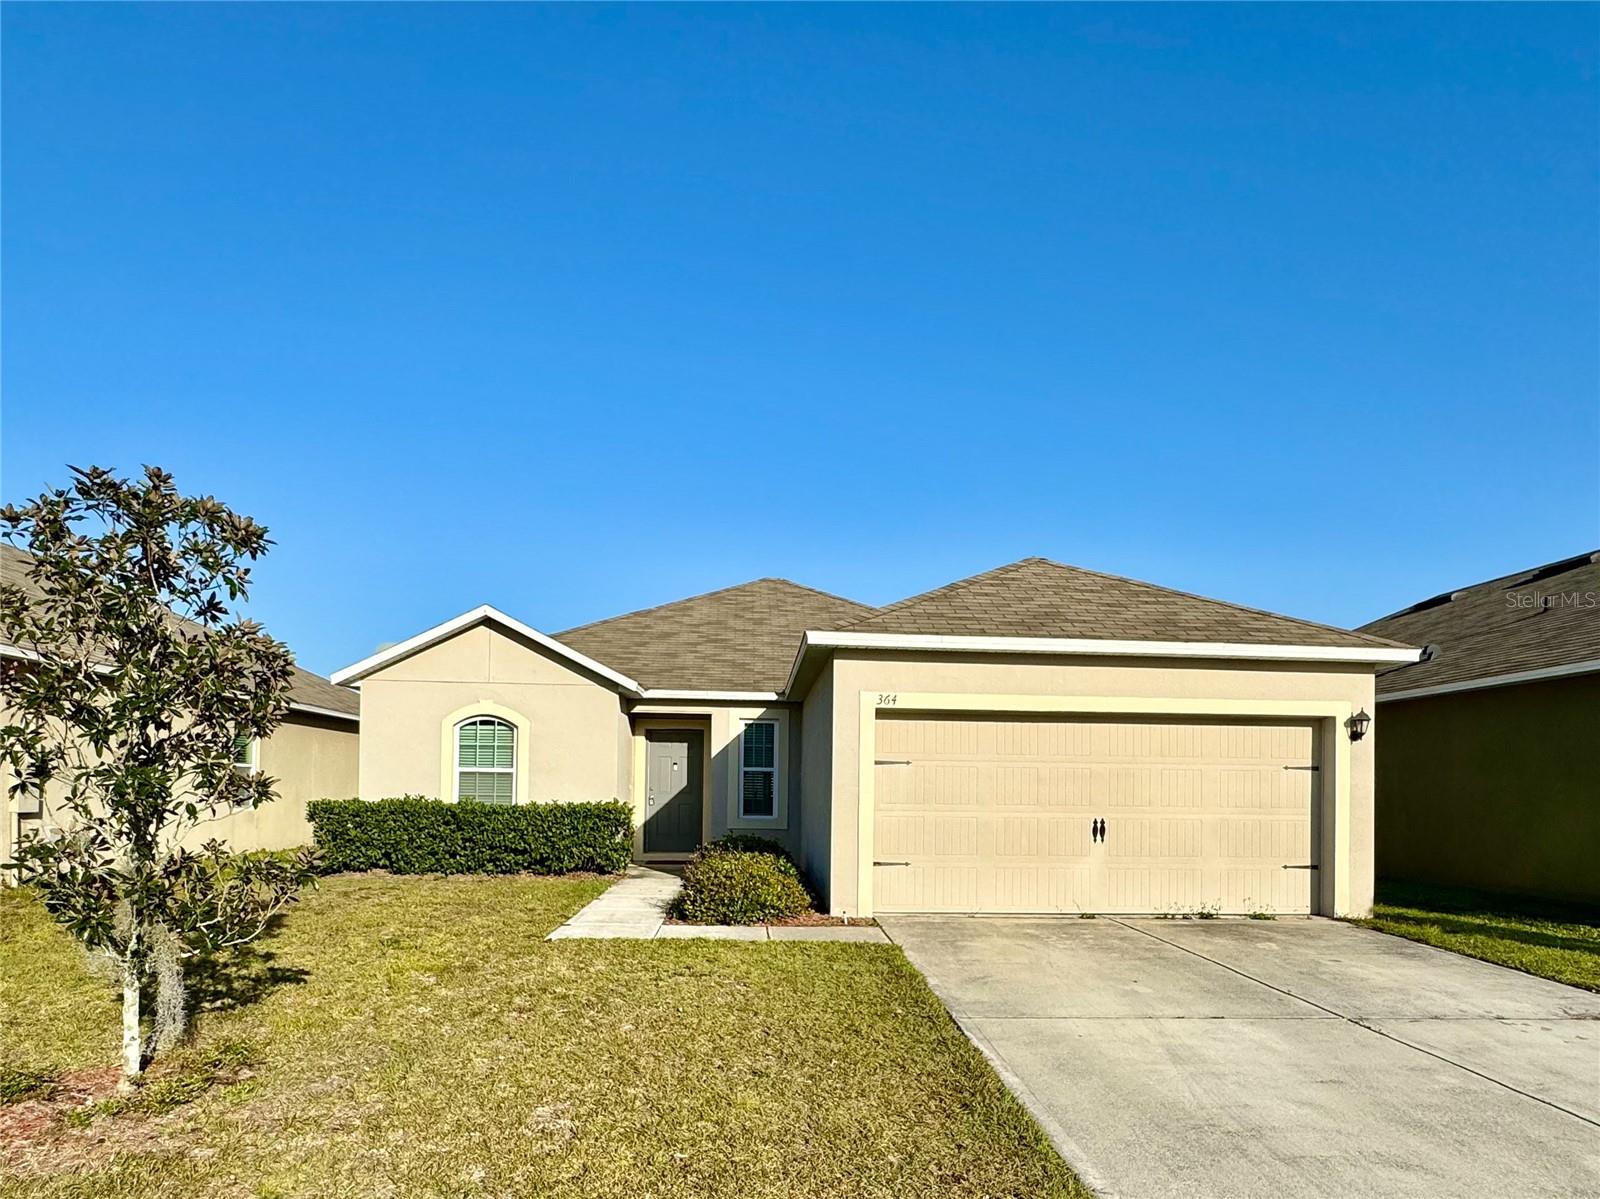 Details for 364 Holly Berry Drive, DAVENPORT, FL 33897